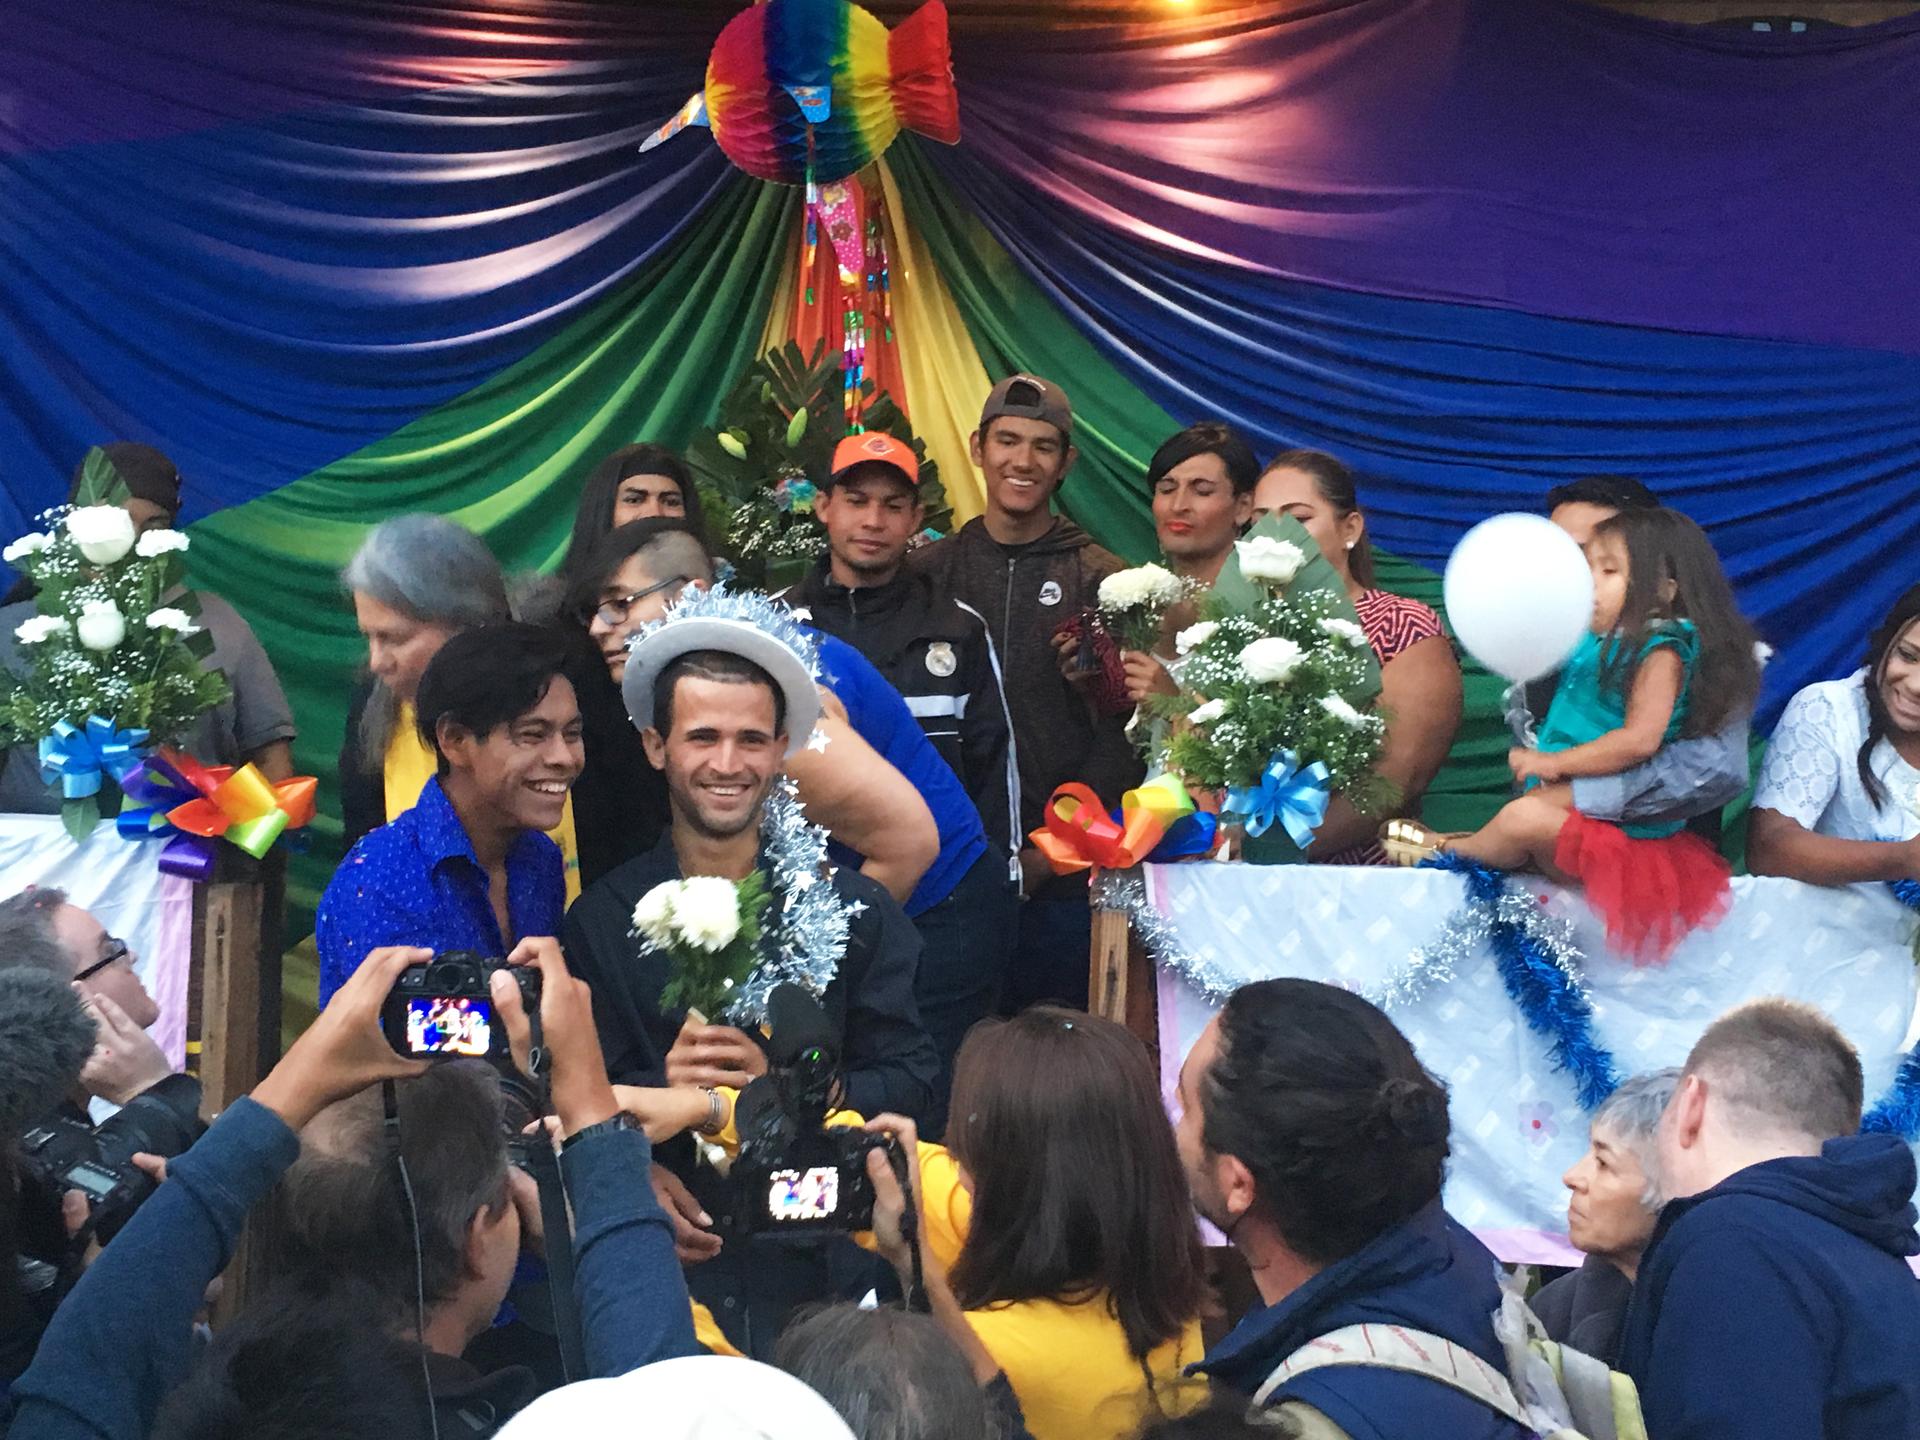 One of seven LGBTQ couples that got married in Tijuana, Mexico pose for a picture with an LGBTQ rainbow flag behind them 